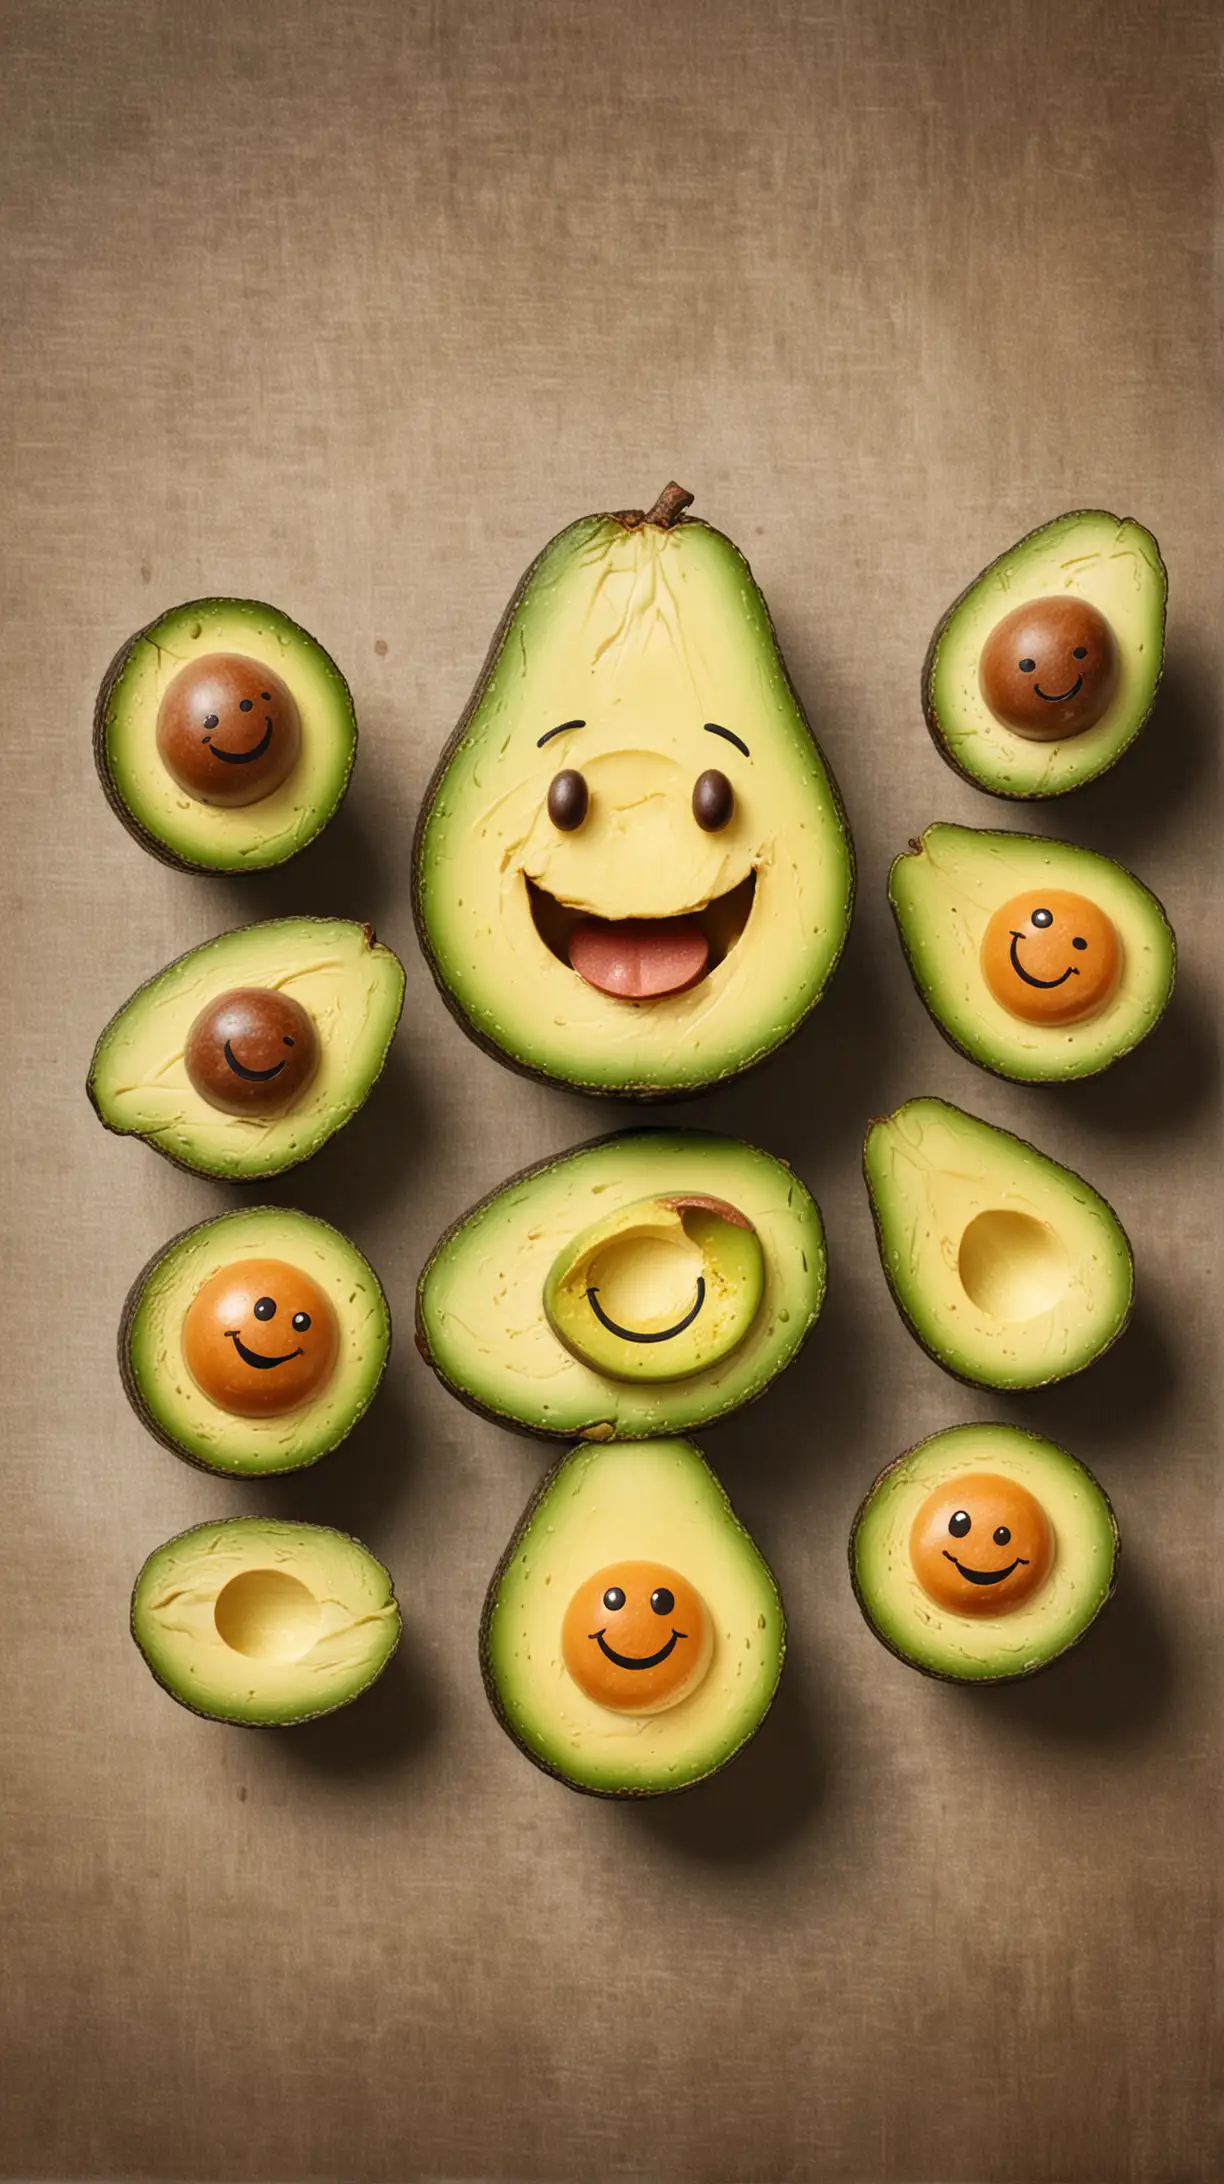  "Design a happy face graphic featuring avocados and happy mood symbols, showcasing how avocados can enhance mood and well-being."